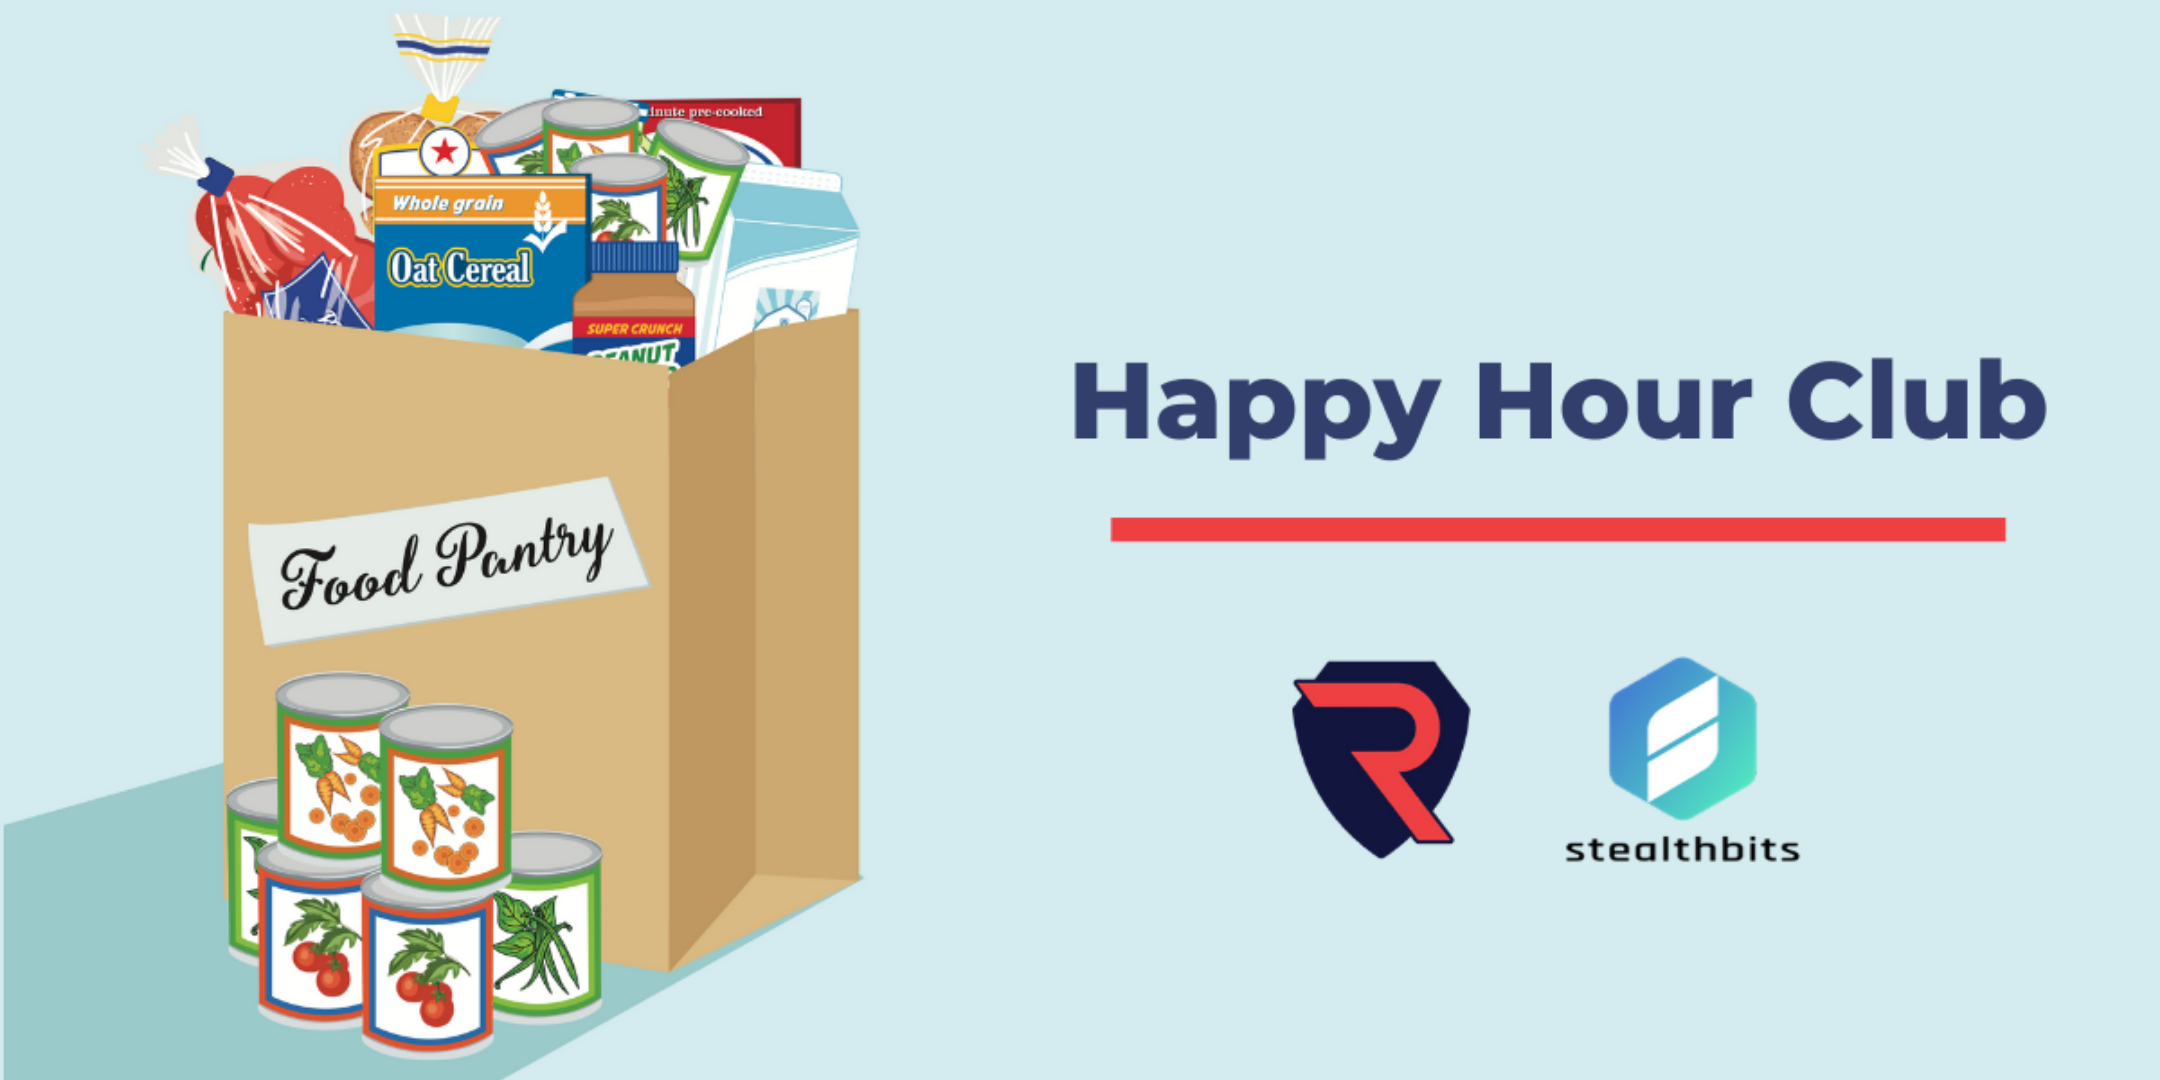 Happy Hour Club with RedLegg and Stealthbits, Food Pantry.